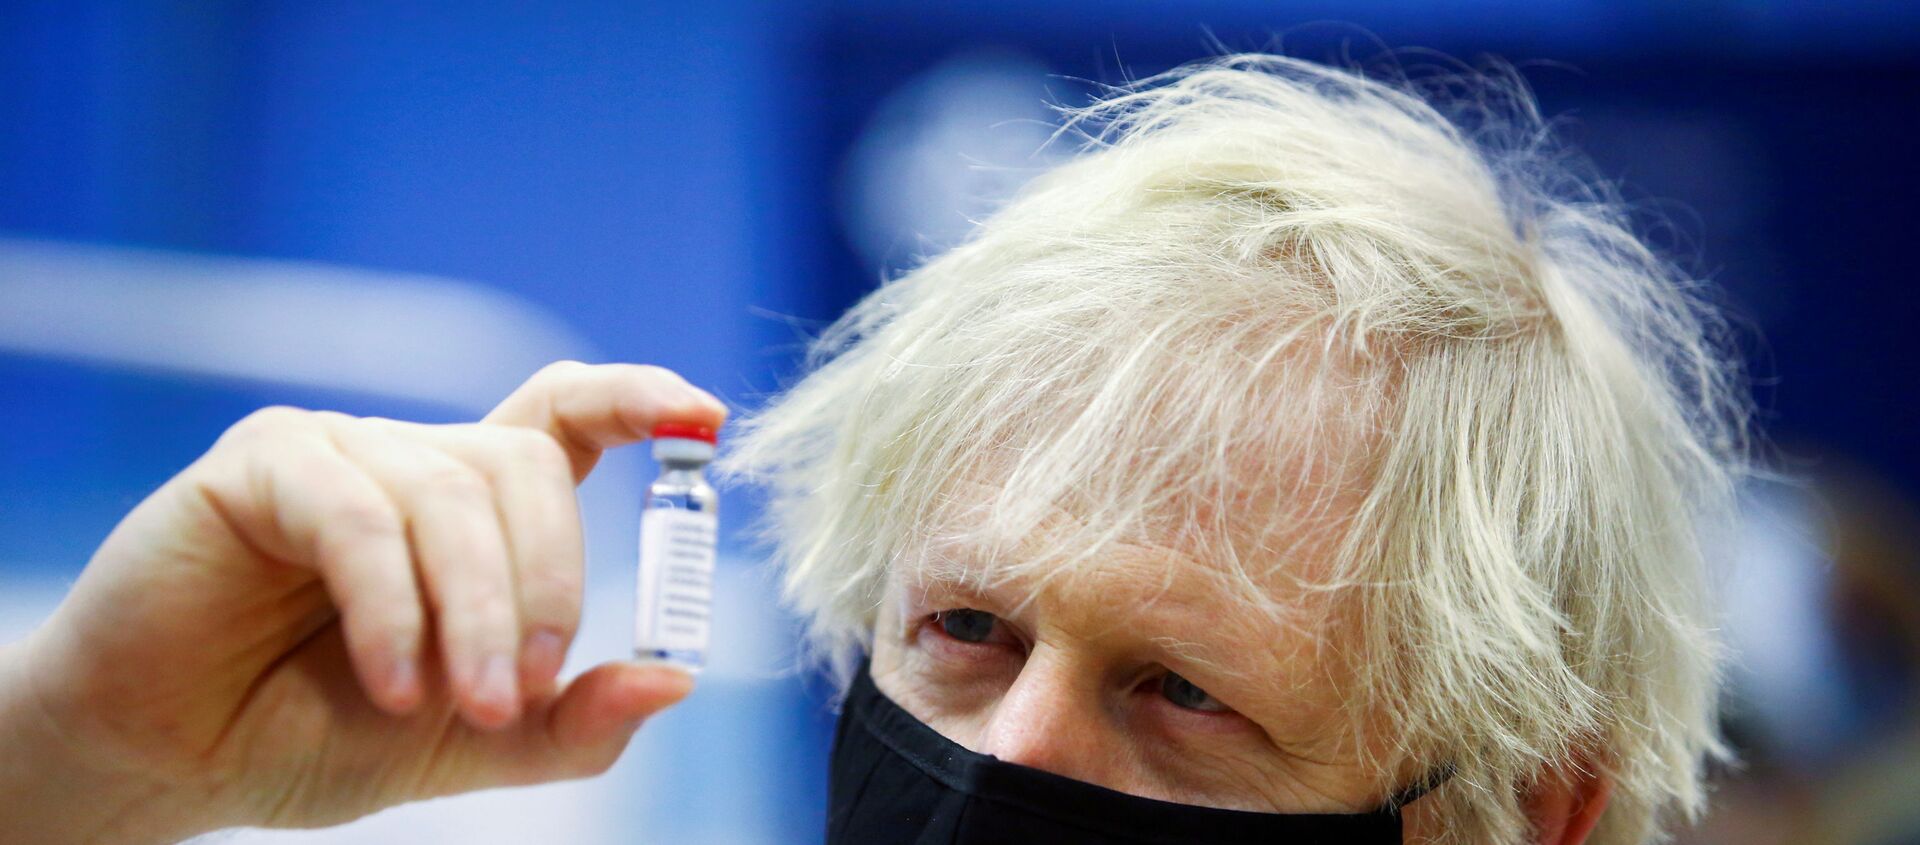 FILE PHOTO: Britain's Prime Minister Boris Johnson holds a vial of an Oxford-AstraZeneca COVID-19 vaccine, during his visit at a vaccination centre at Cwmbran Stadium in Cwmbran, south Wales, Britain February 17, 2021. Geoff Caddick/Pool via REUTERS/File Photo - Sputnik International, 1920, 12.03.2021